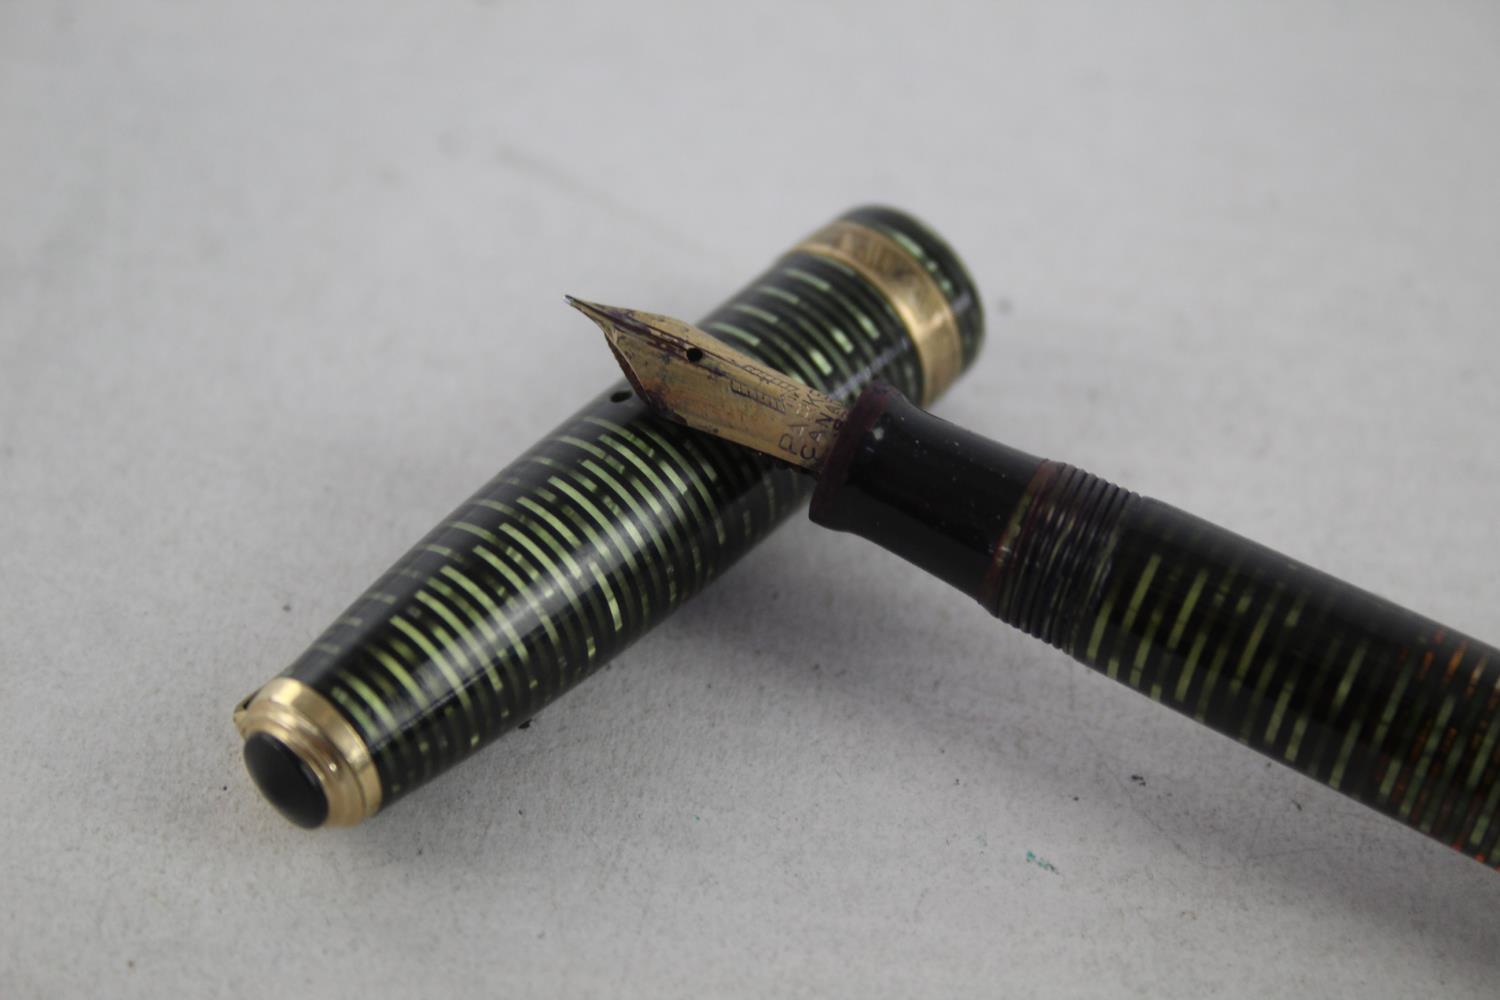 Vintage PARKER Vaccumatic Green FOUNTAIN PEN w/ 14ct Gold Nib WRITING Vintage PARKER Vaccumatic - Image 2 of 7